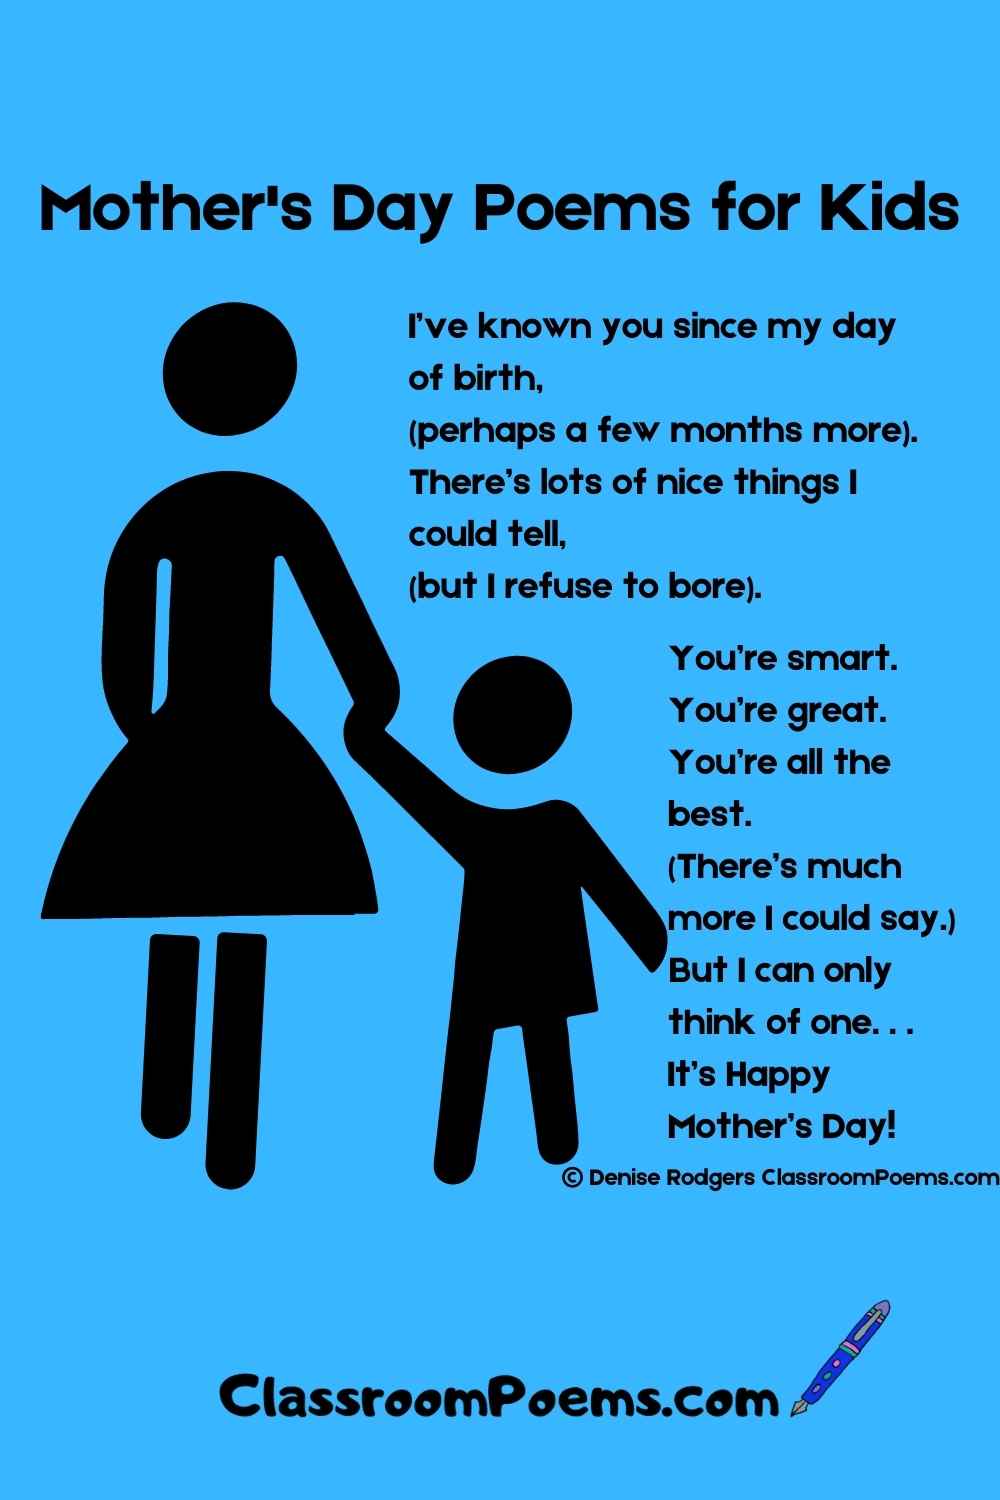 The funny Mothers Day poems and Mom Poems on this page are perfect for sharing with your mom or grandma.